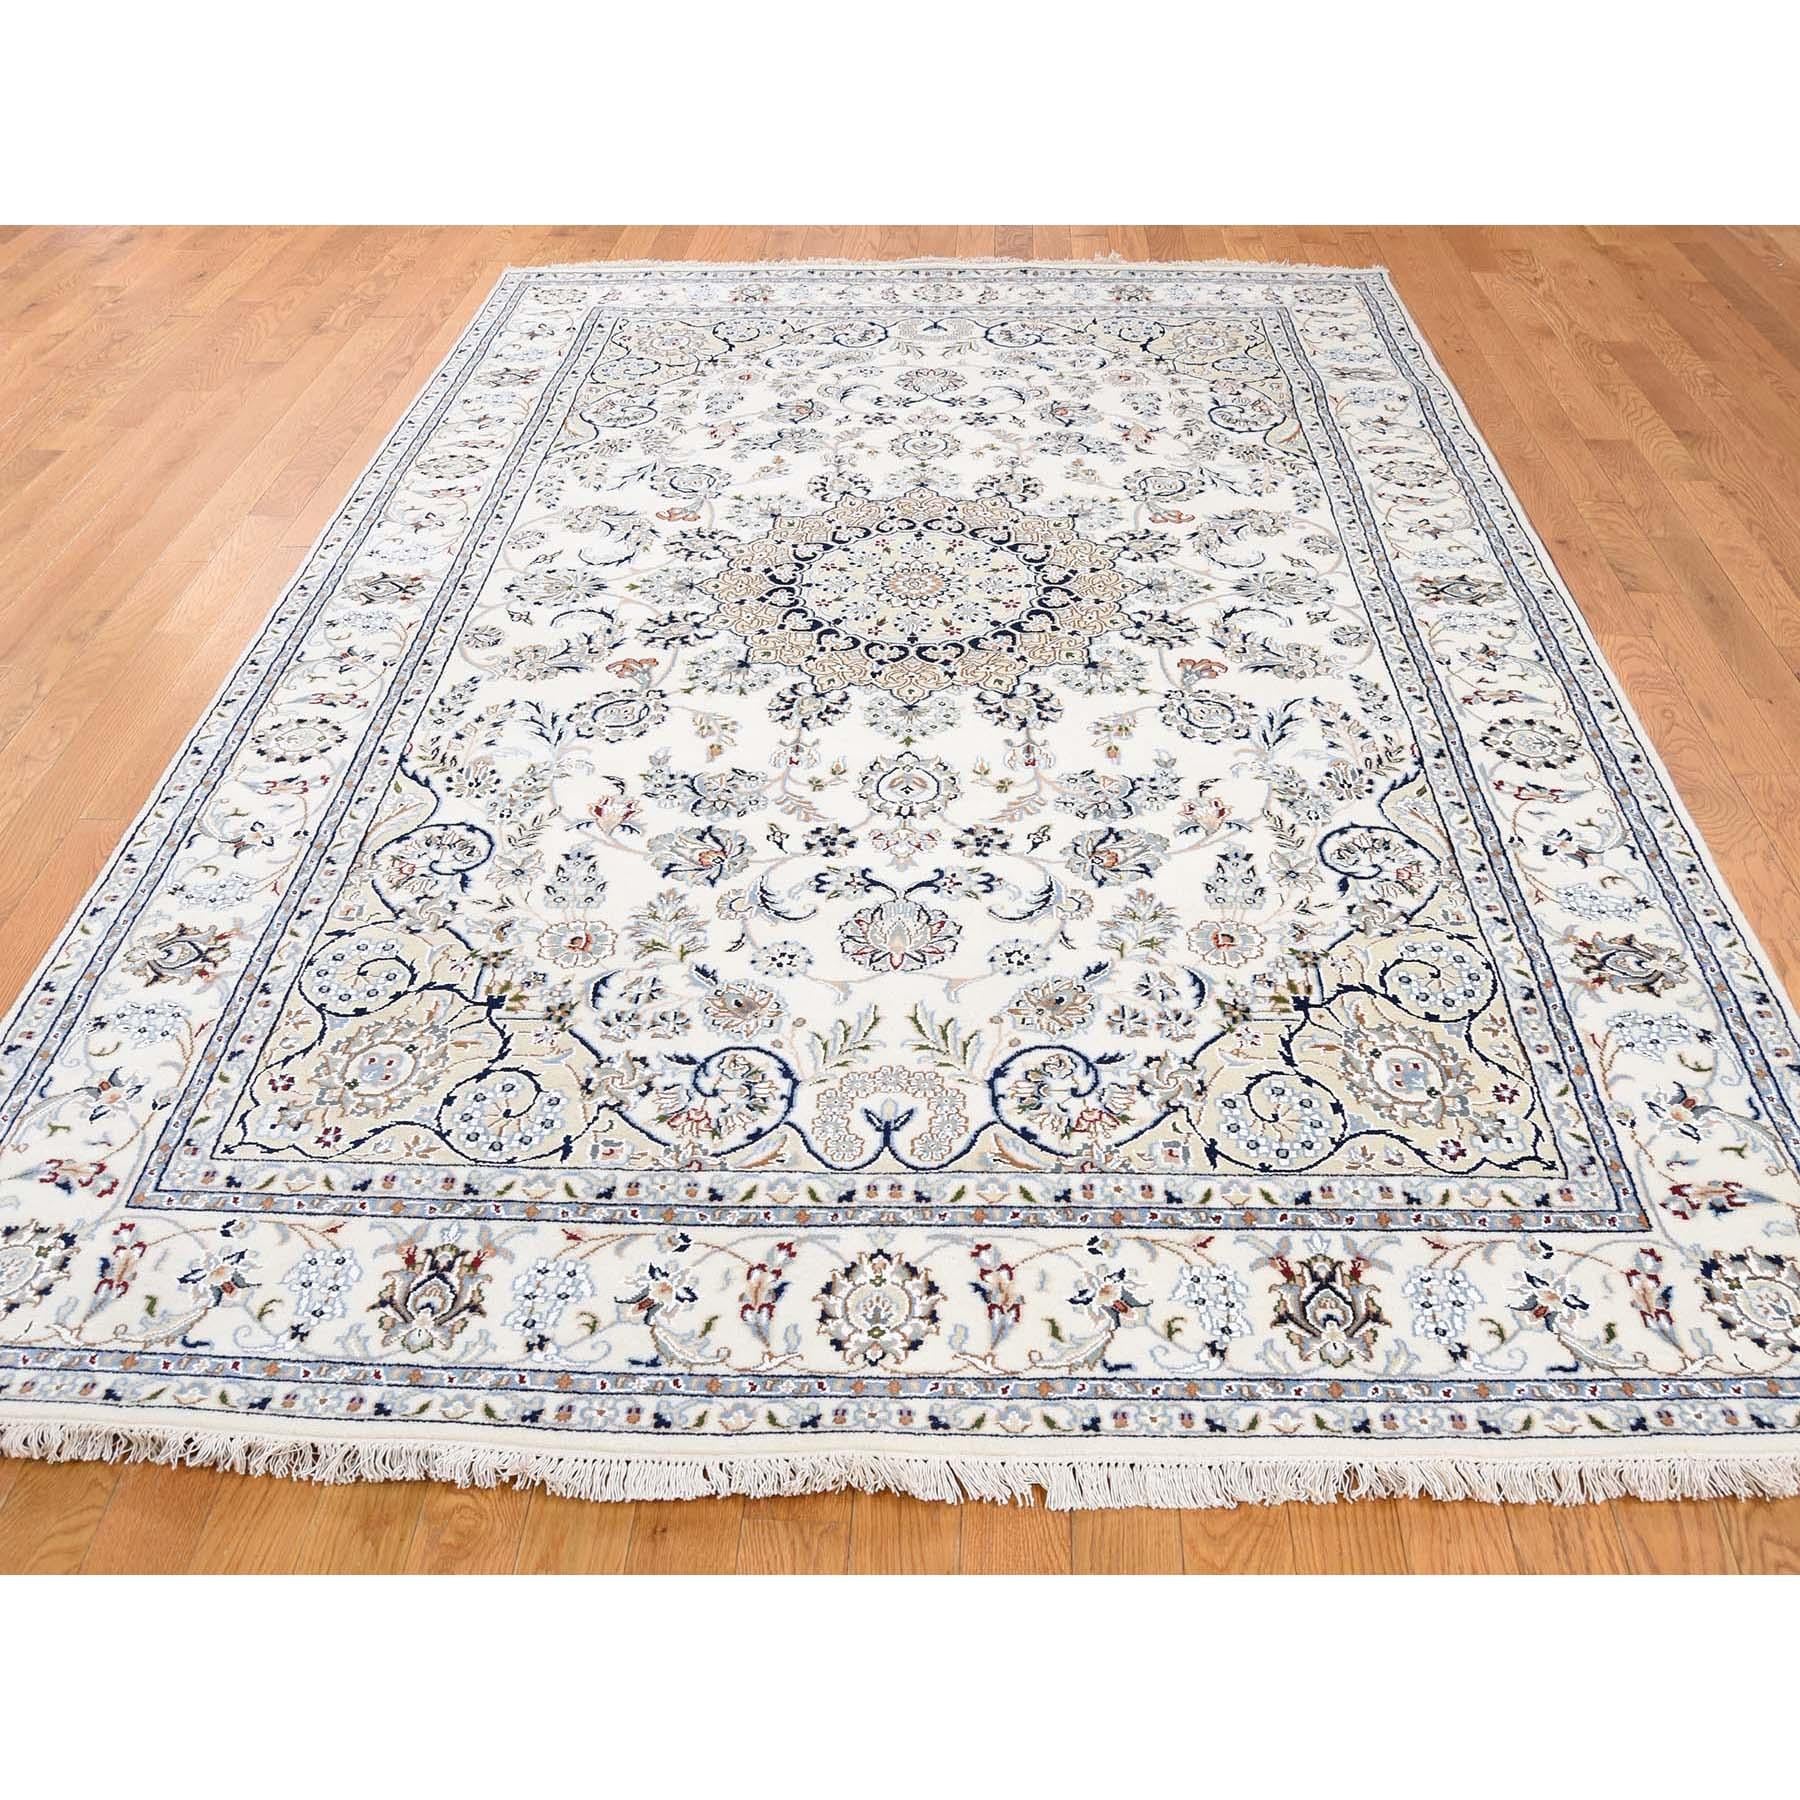 This is a truly genuine one-of-a-kind wool and silk 250 Kpsi ivory Nain hand knotted Oriental rug. It has been knotted for months and months in the centuries-old Persian weaving craftsmanship techniques by expert artisans. Measures: 6'0